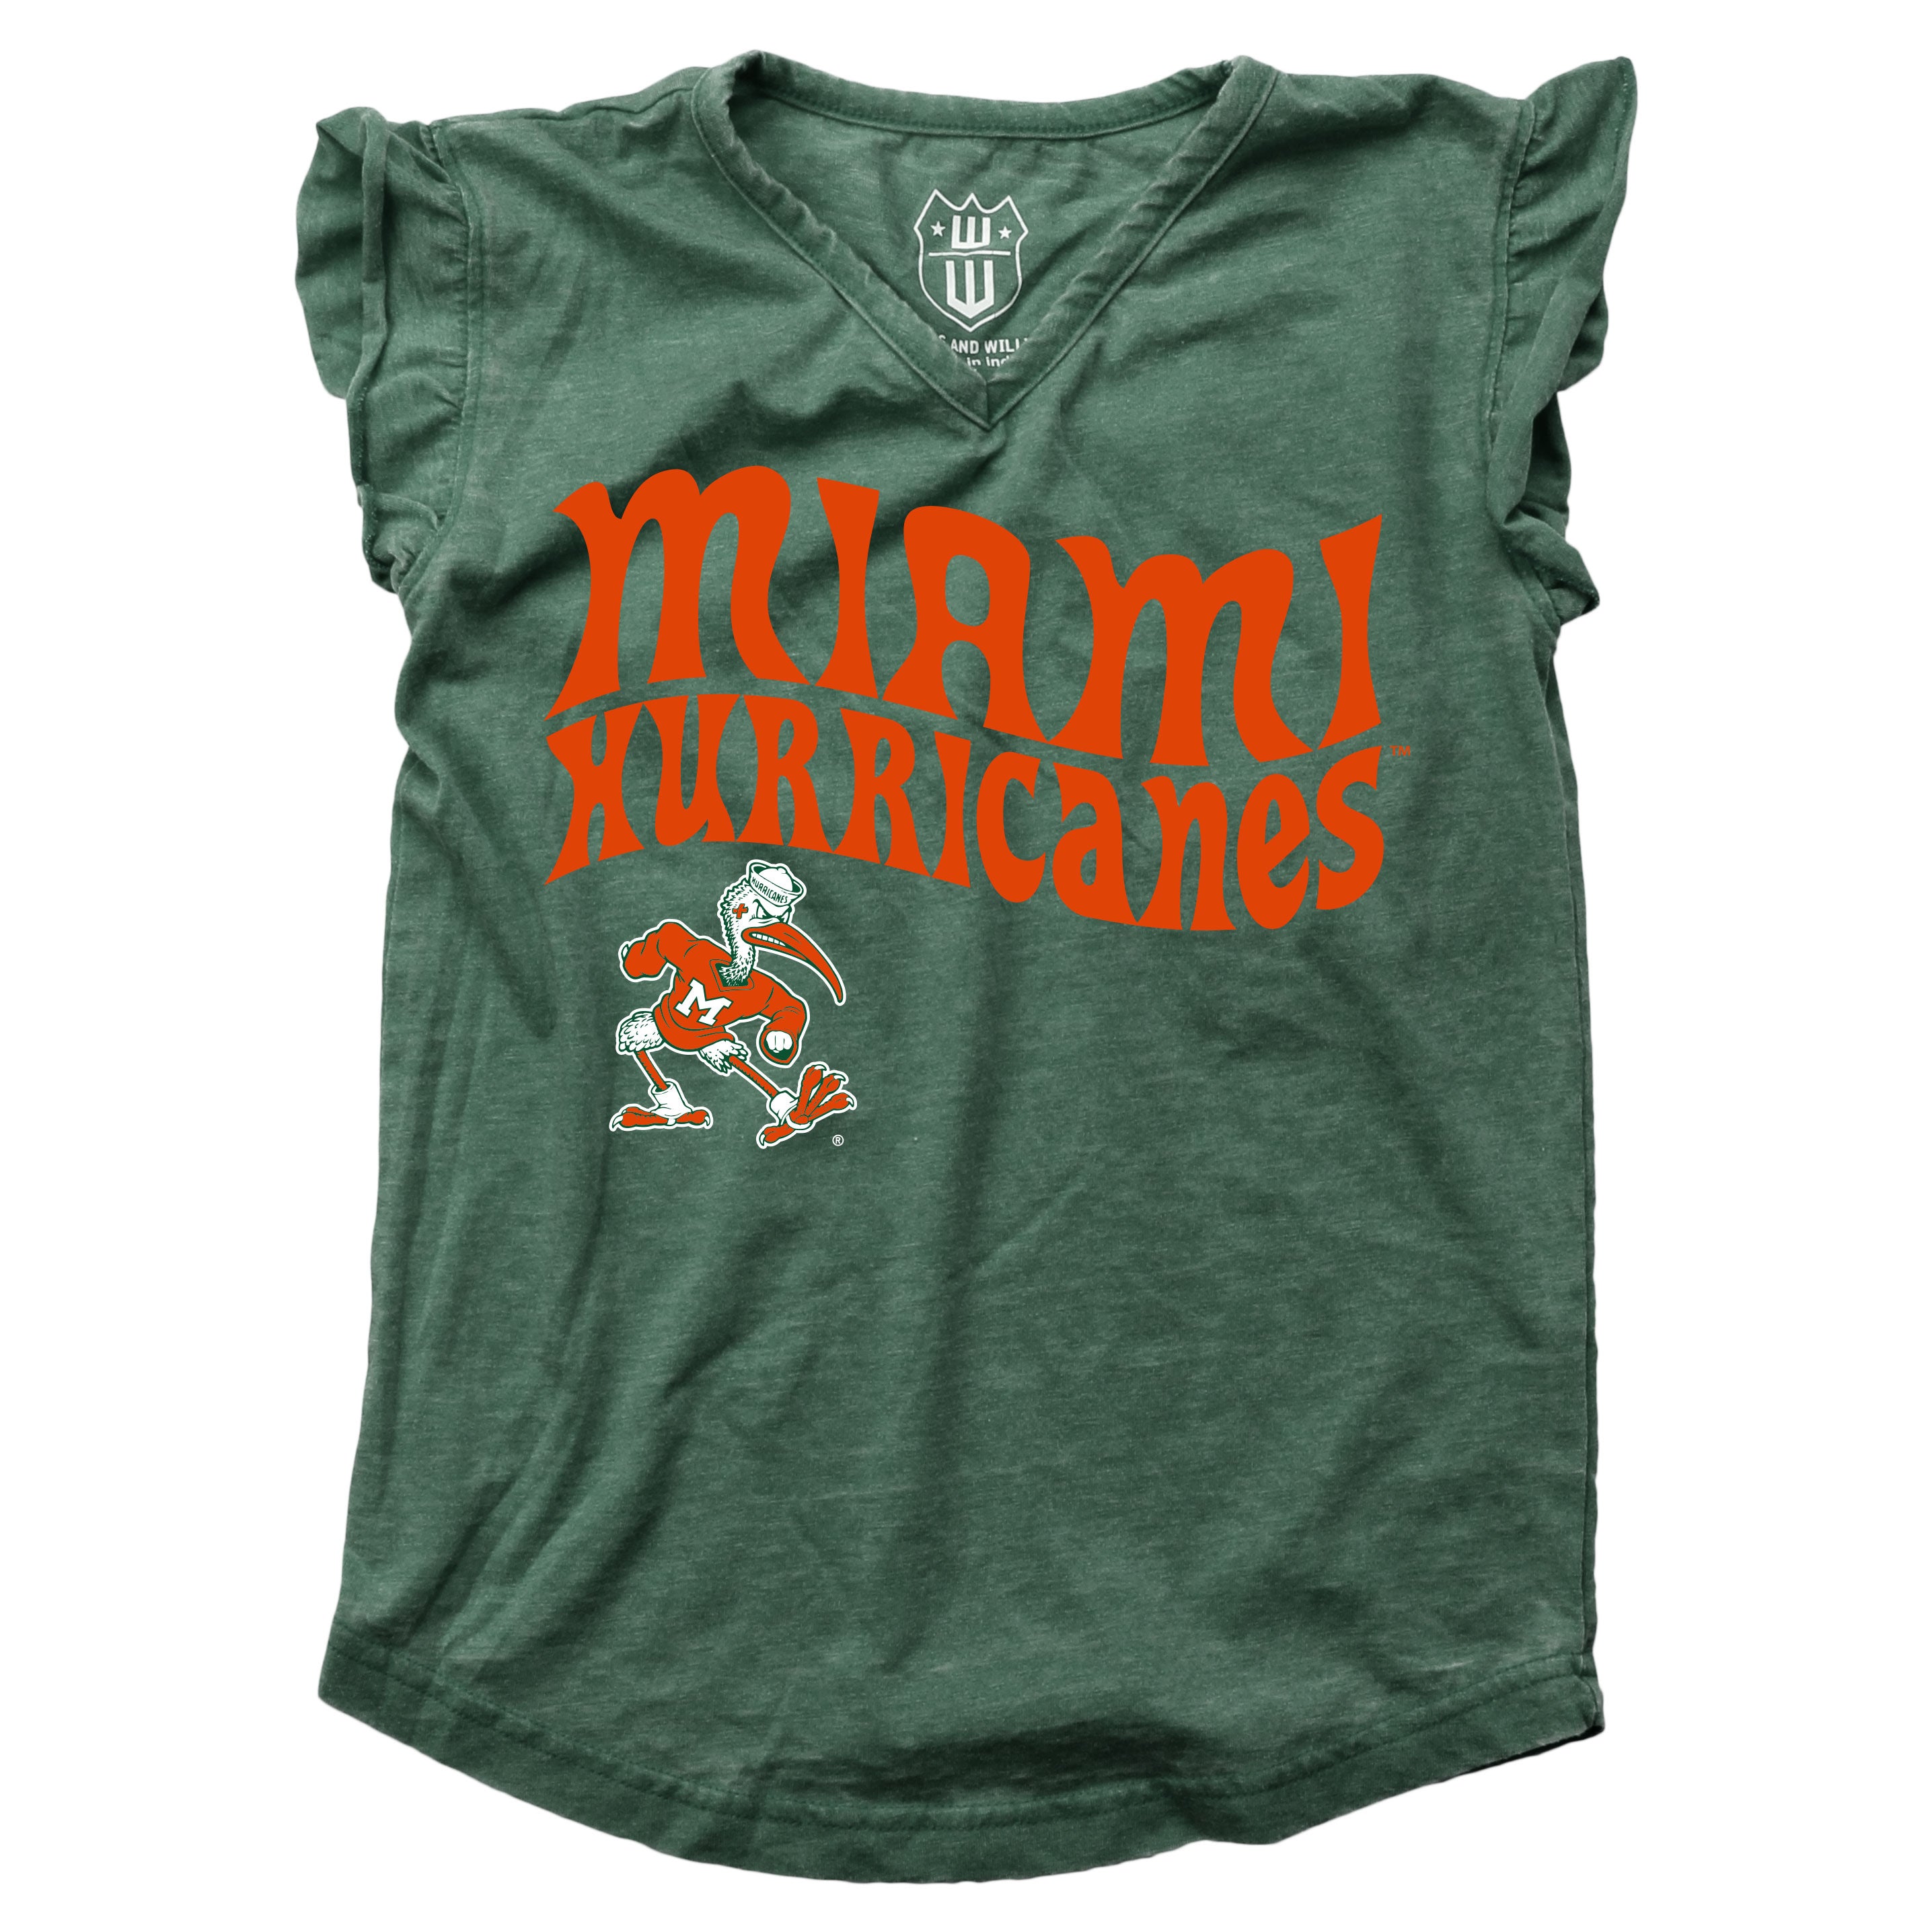 Miami Hurricanes Wes and Willy Girls Burn Out Ruffle Sleeve T-Shirt - Green